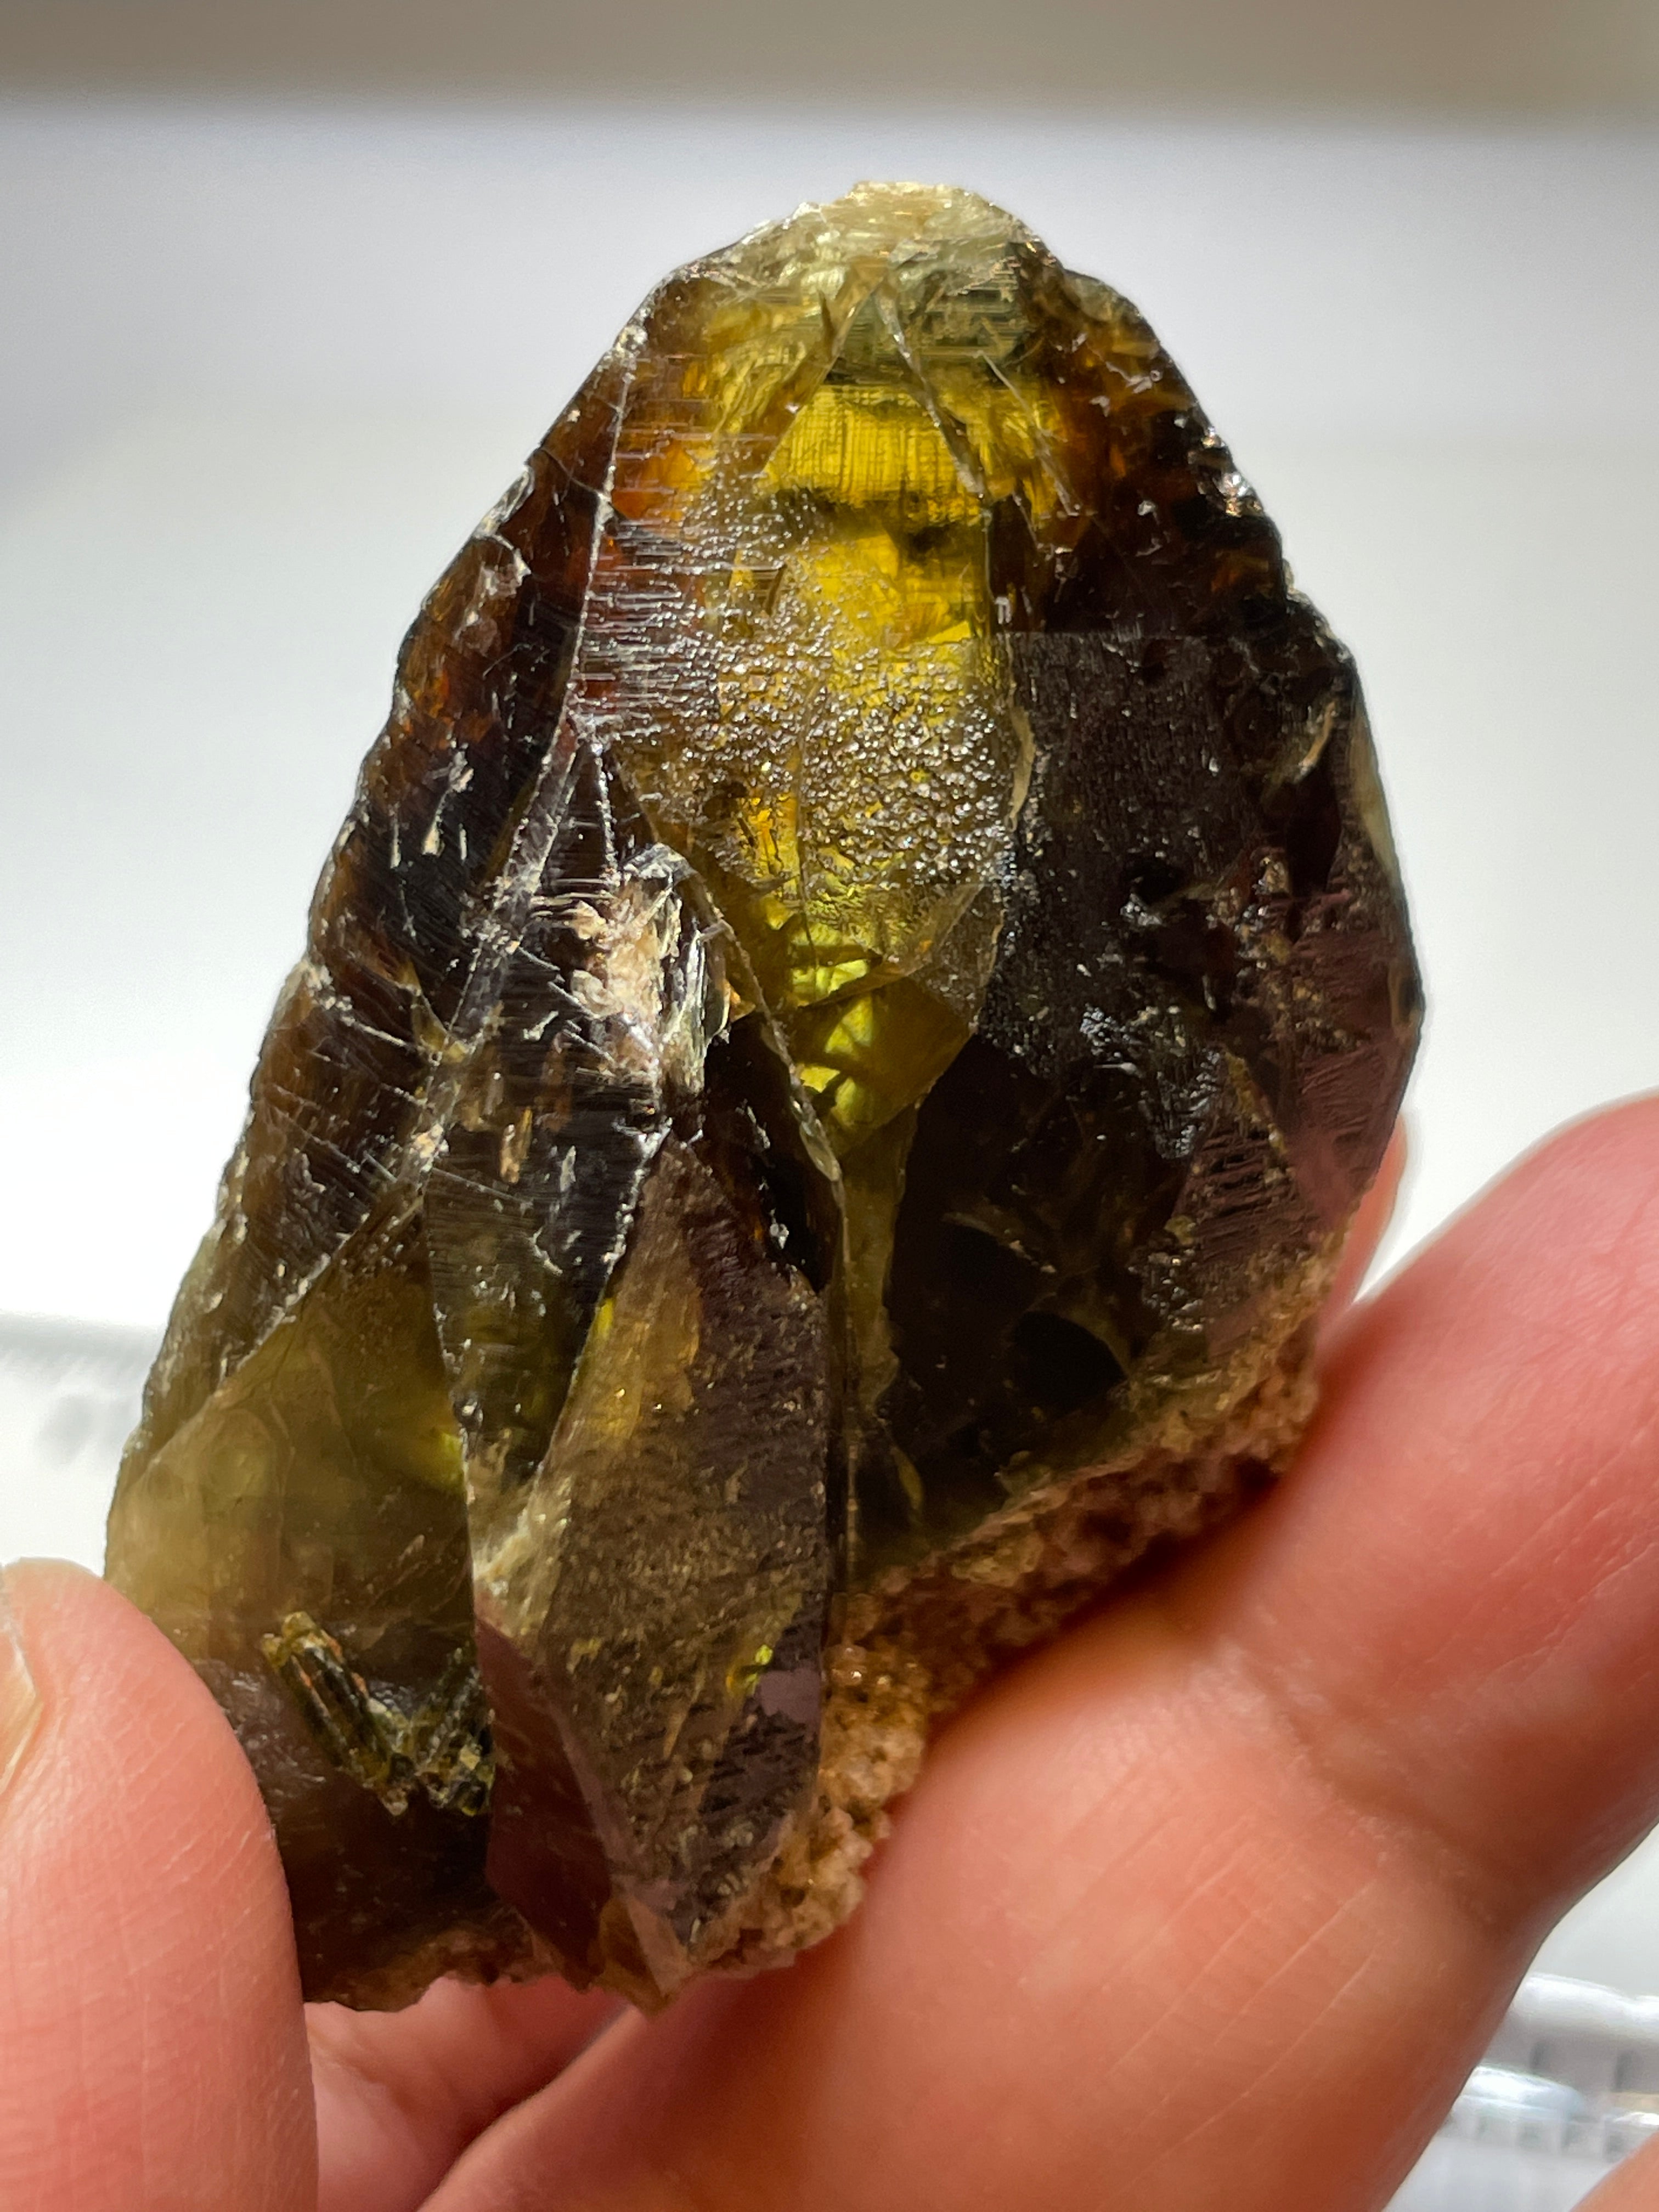 227.39Ct / 45.47Gm Tanzanian Sphene Crystal Untreated Unheated. 55.6 X 41.1 17.7Mm Very High End